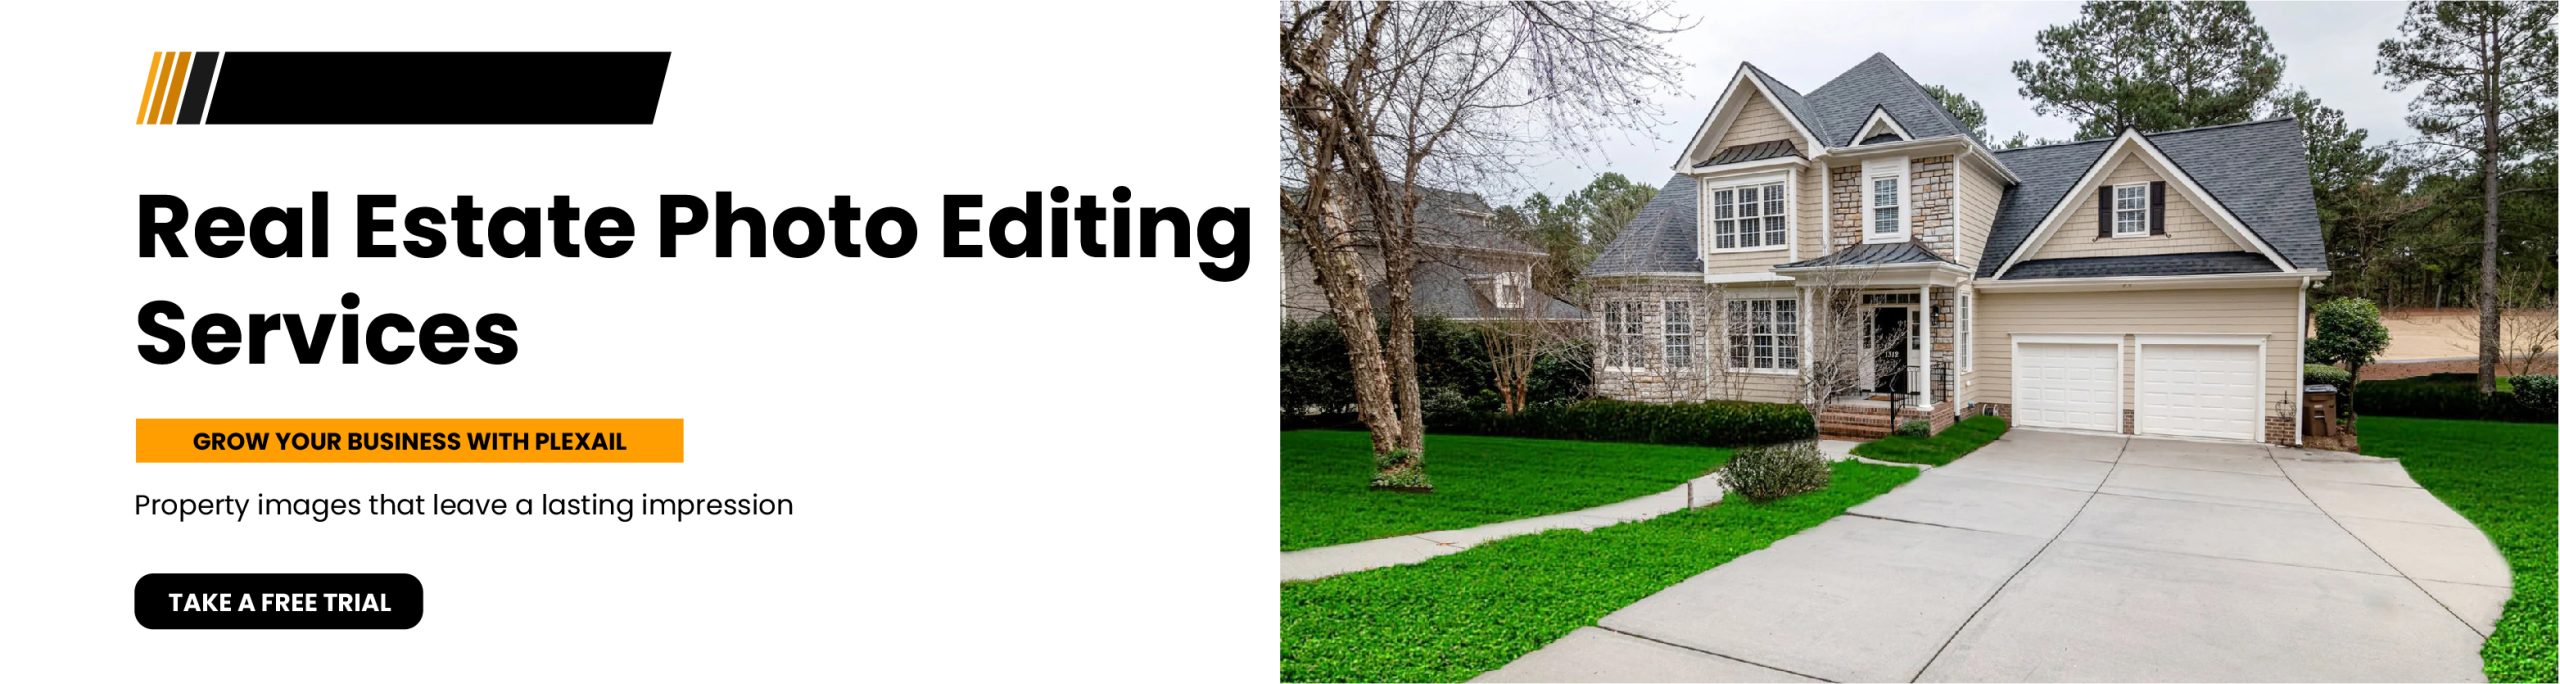 online real estate photo editing services in usa